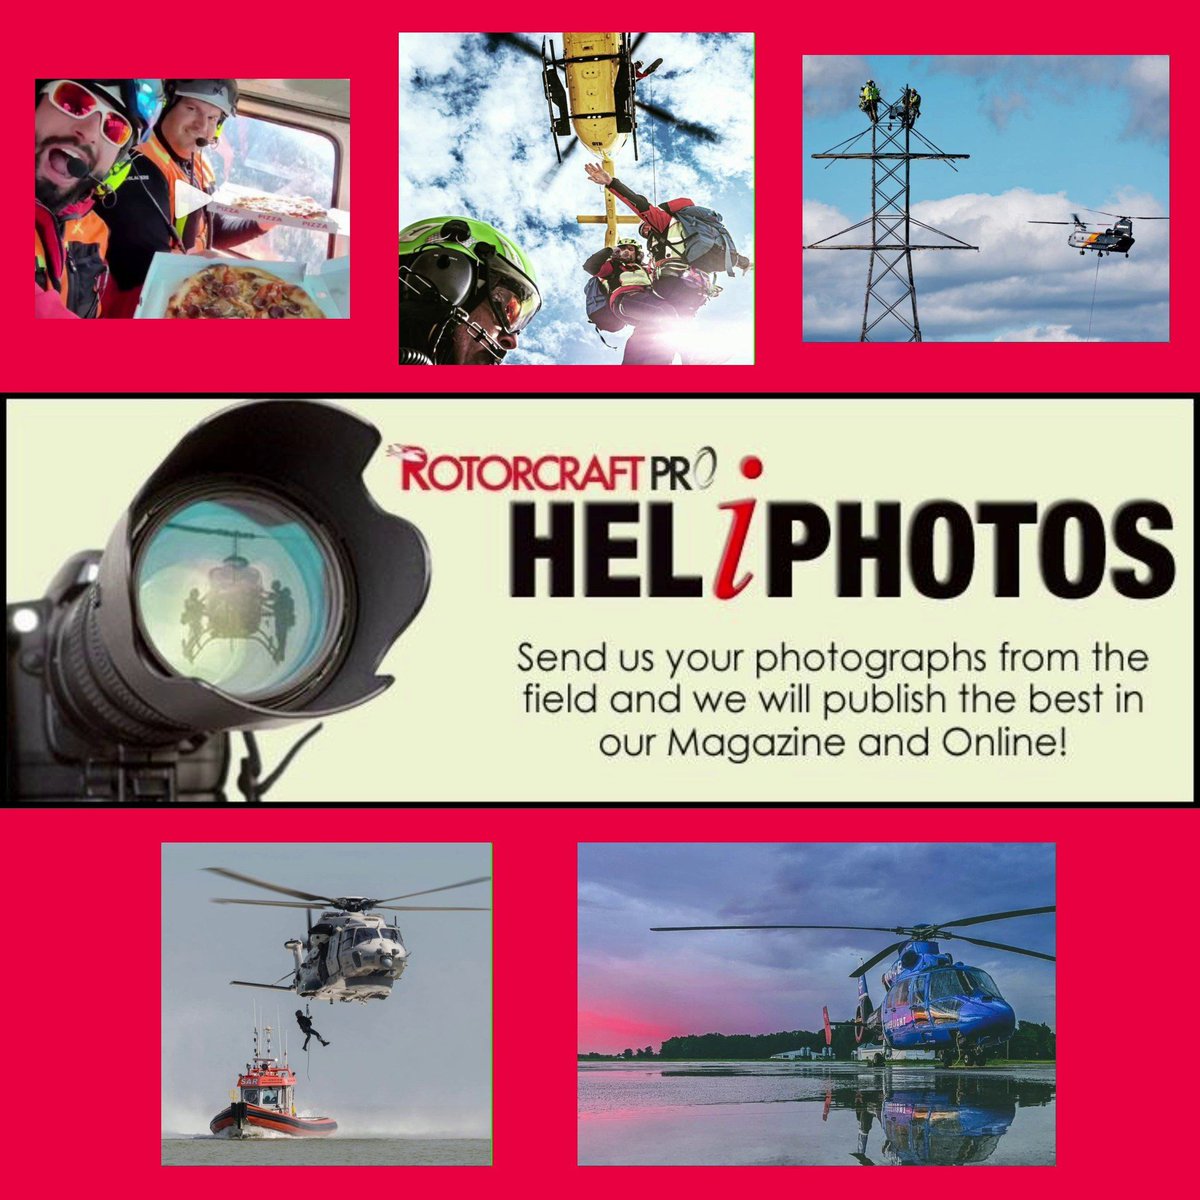 Have an amazing HeliPhoto? Want to be featured in our magazine? For consideration, send us your hi-res images along with your name, location and what's going on in the photo to the Editor via email: Lyn.Burks@rotorpro.com. #Helicopter #Helicopters #Pilot #HelicopterPilot